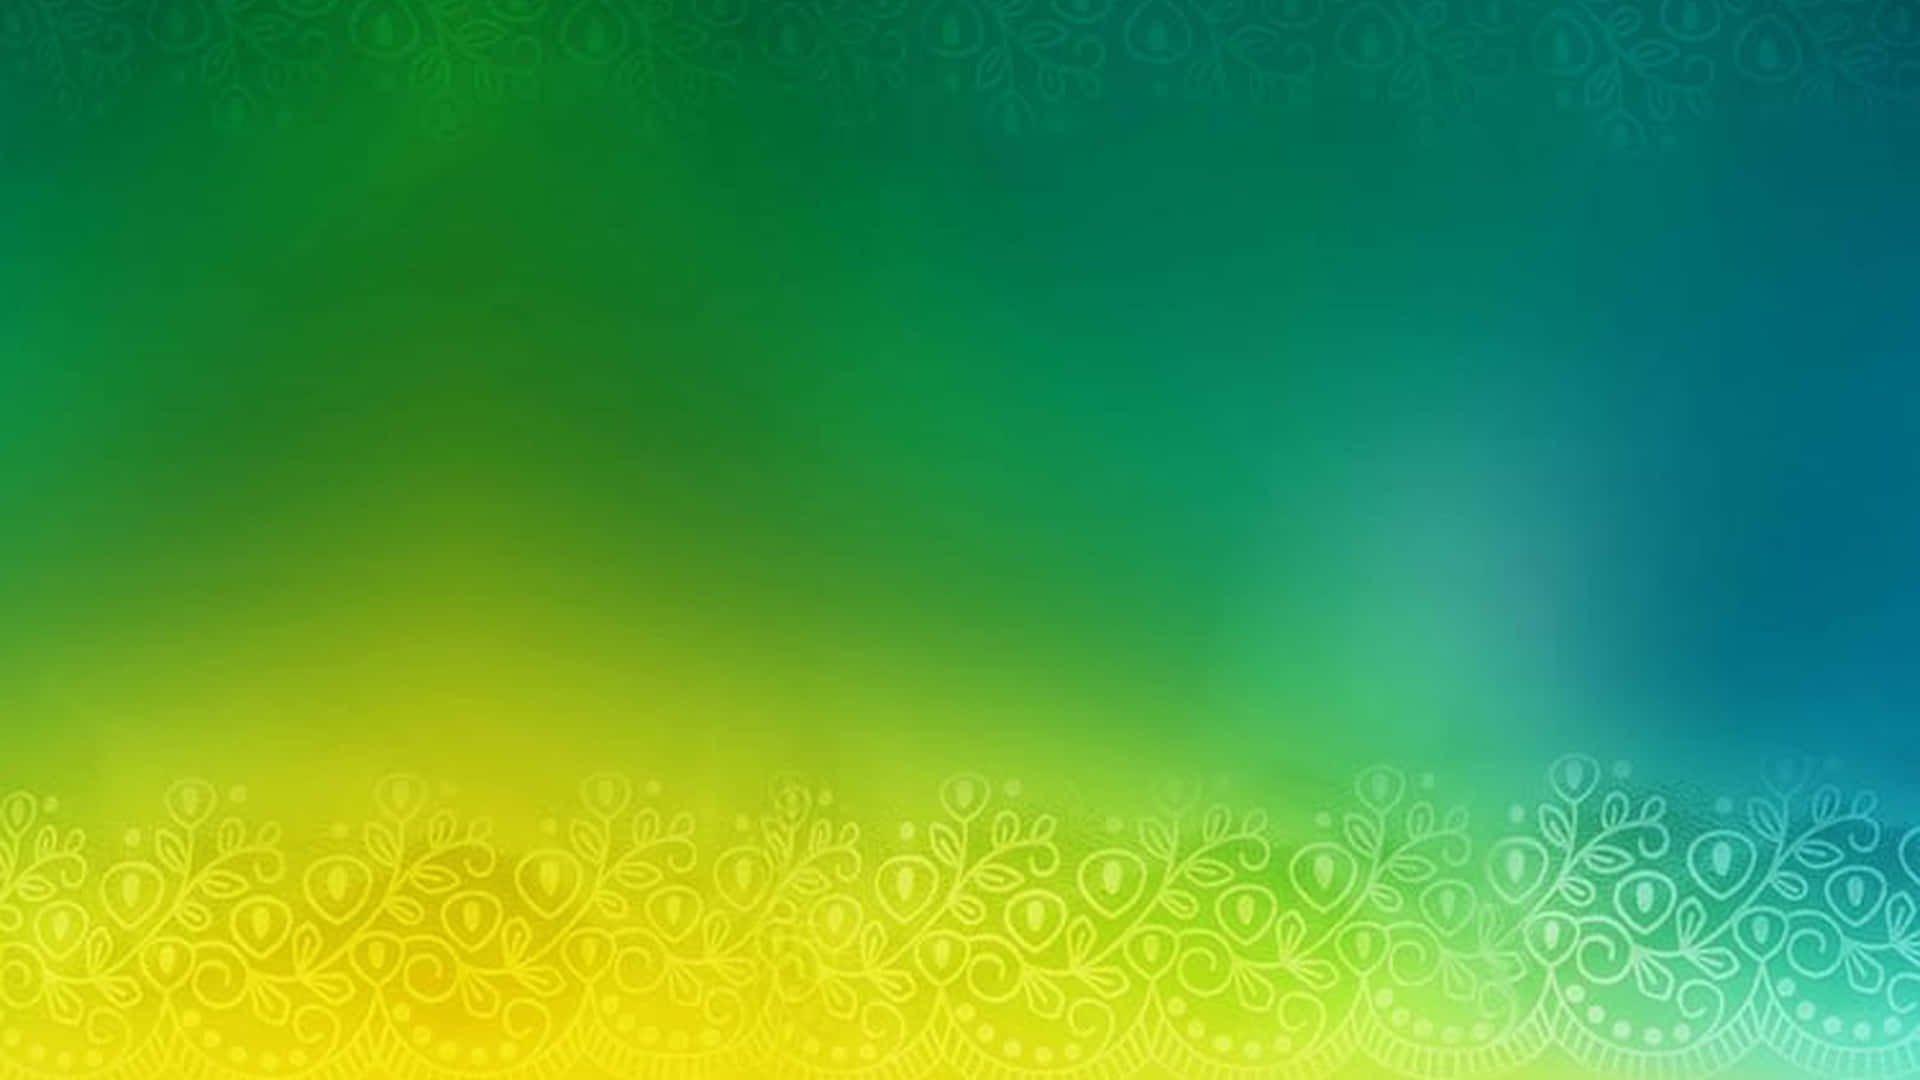 A beautiful vibrant green and yellow abstract background.